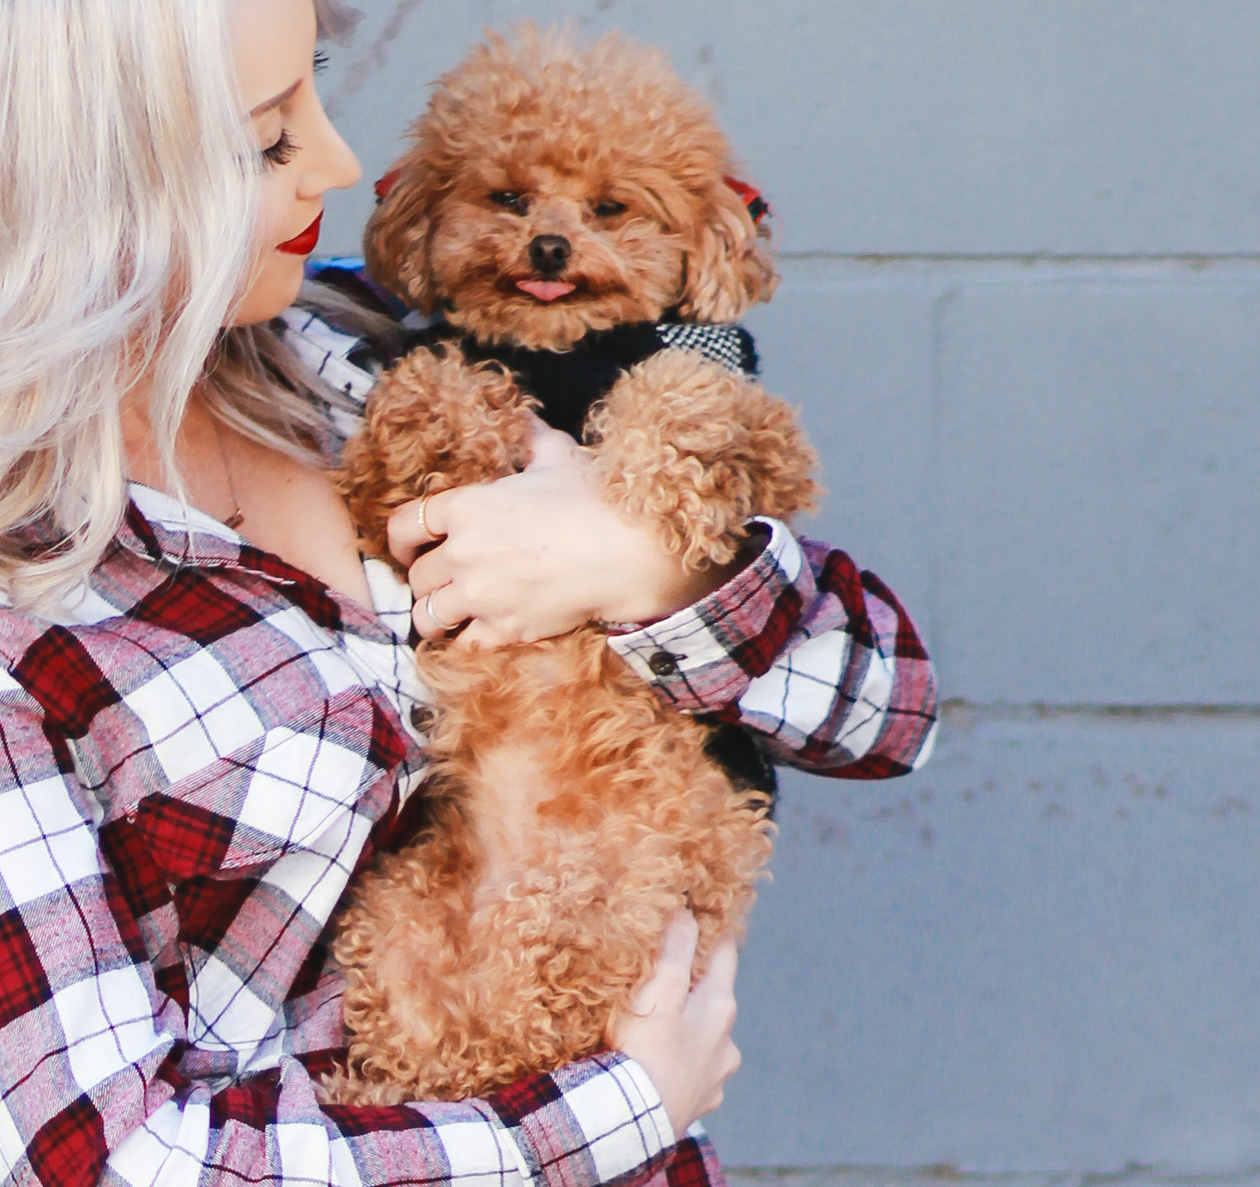 Plaid Button Up | StyledByBlondie.comPlaid Button Up + Red Maltipoo | StyledByBlondie.com